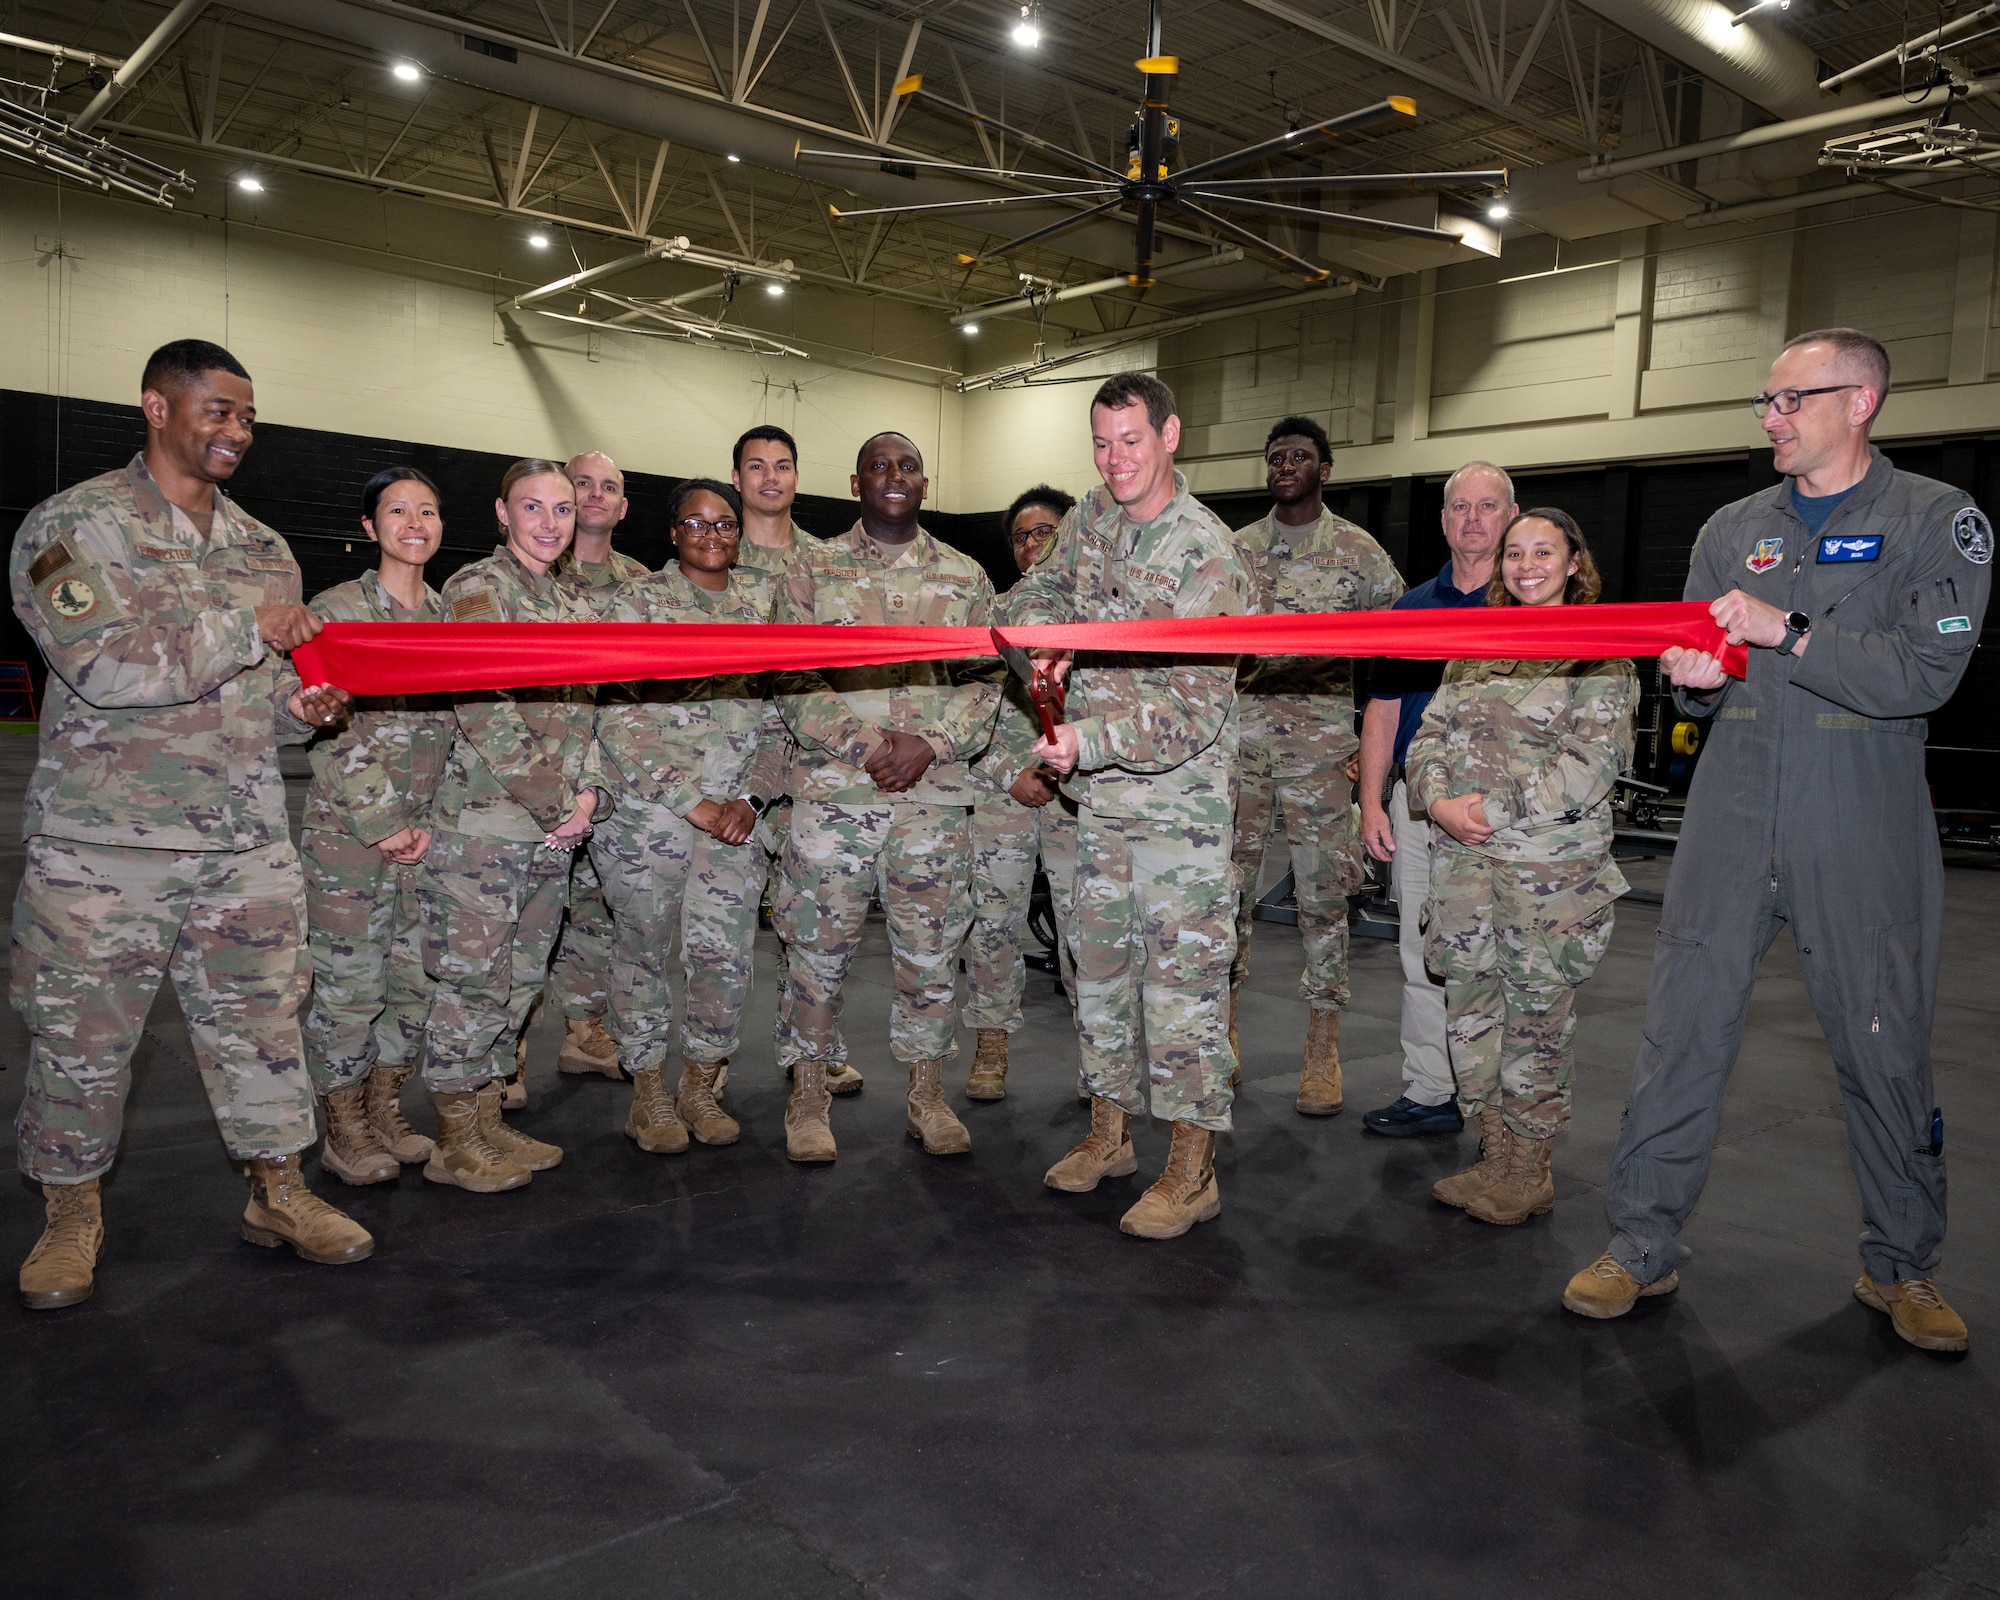 U.S. Air Force Col. Steven M. Bofferding, far right, 4th Fighter Wing vice commander, assists Lt. Col. Timothy Kirchner, center, 4th Force Support Squadron commander, and members of the 4th Mission Support Group, cut a ribbon during the Seymour Johnson Fitness Center's Multi-Functional Fitness Room ribbon cutting ceremony at Seymour Johnson Air Force Base North Carolina, April 4, 2023. The ribbon cutting was for the re-opening of a newly renovated workout room in the SJAFB Fitness Center.